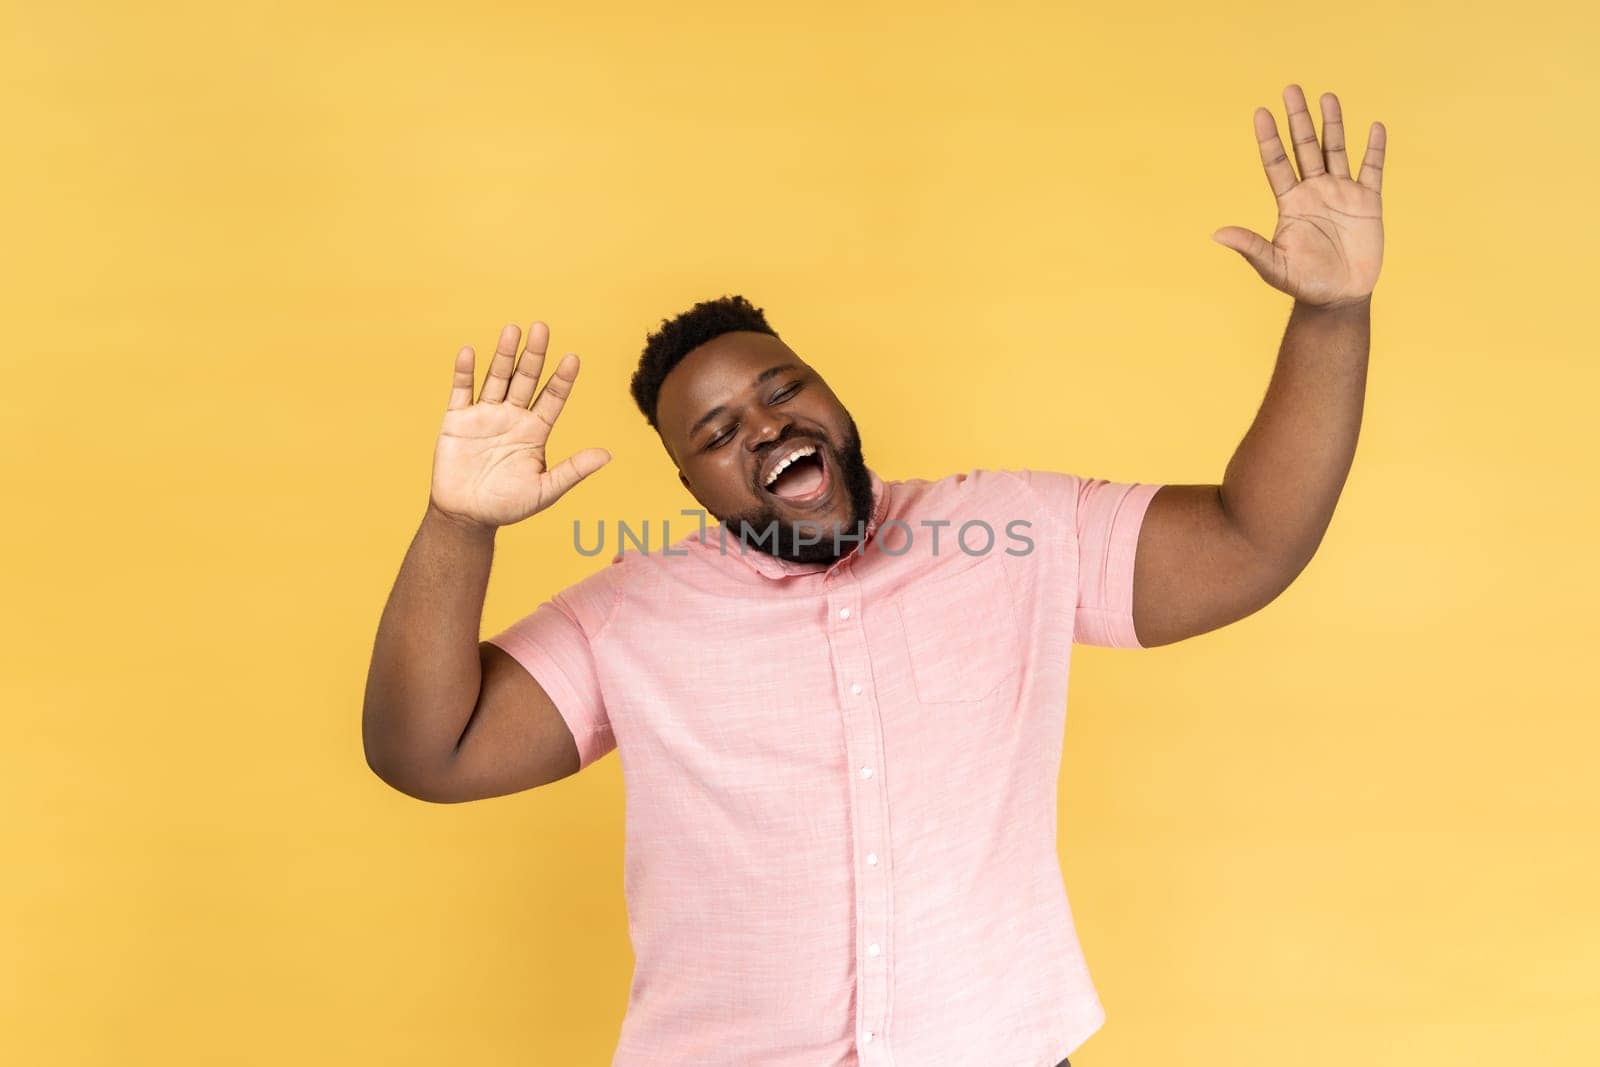 Portrait of excited positive man with beard wearing pink shirt dancing, raising hands up and having fun, being in good mood, celebrating. Indoor studio shot isolated on yellow background.